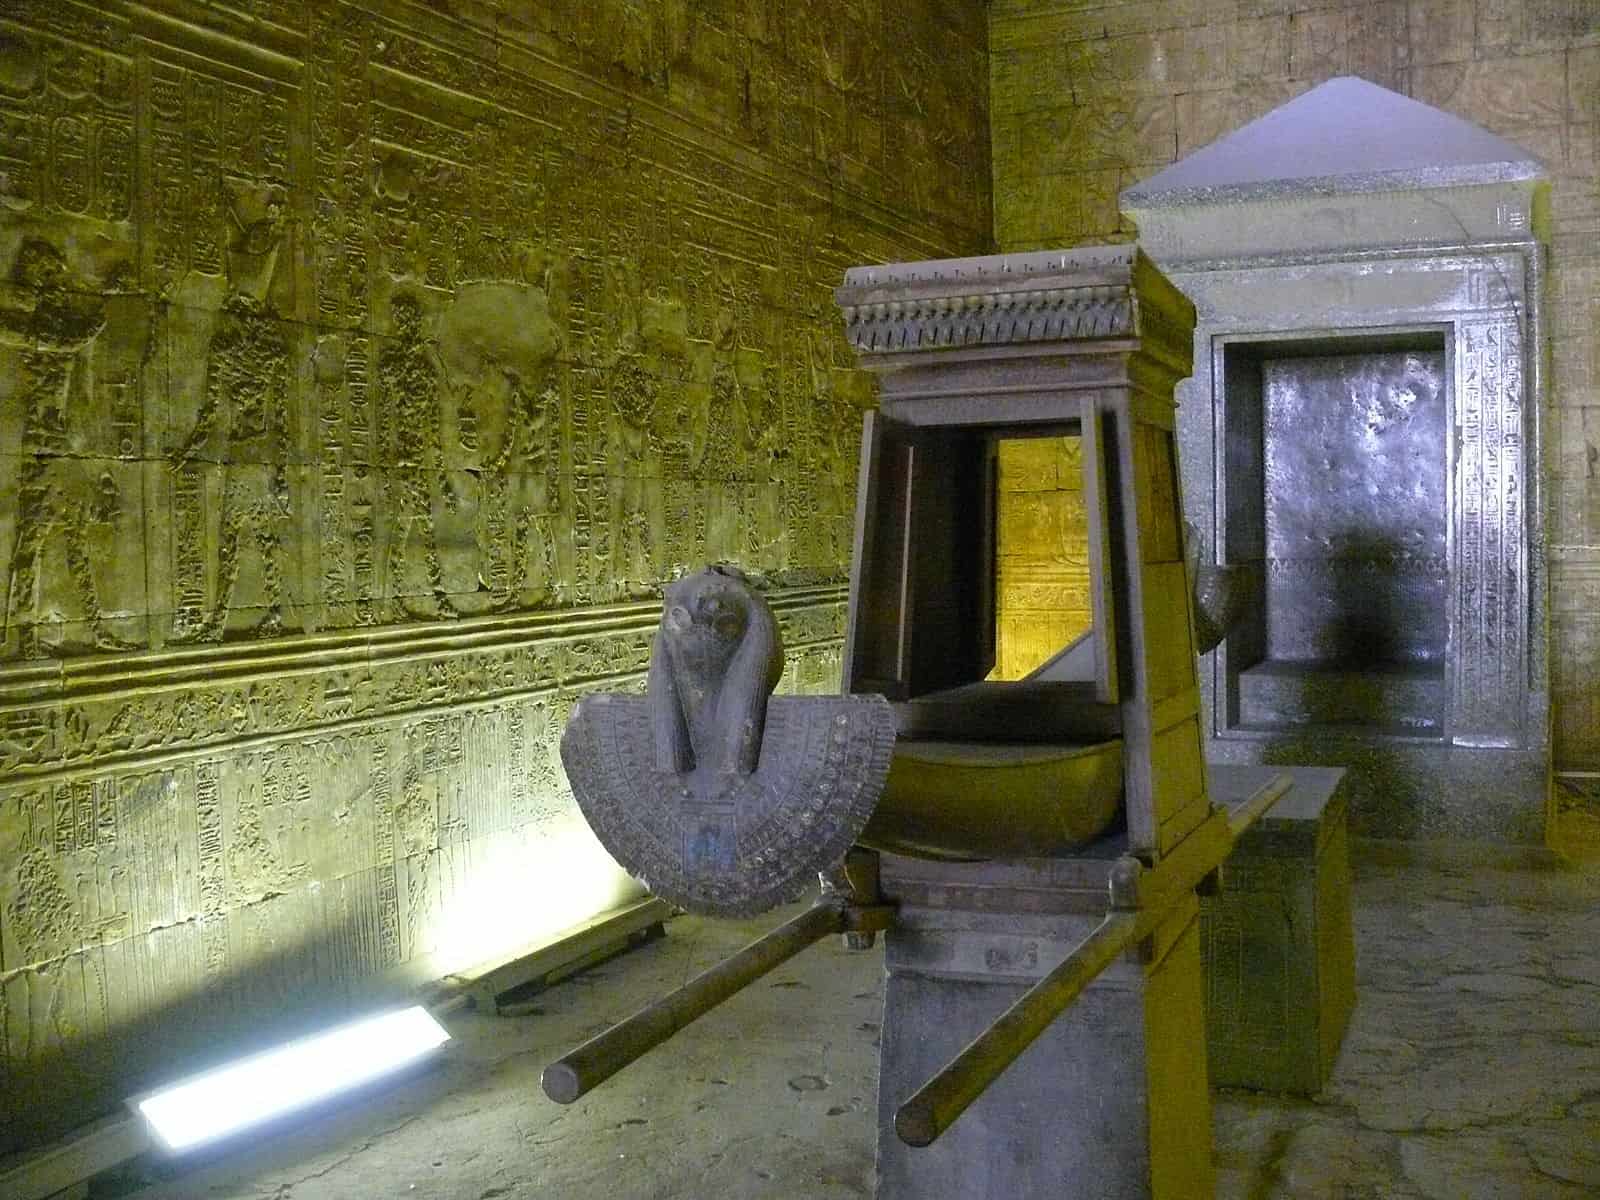 EdfuHolybark- - The ‘Osiris device’, the Bark of Horus, and connections to the Ark of the Covenant